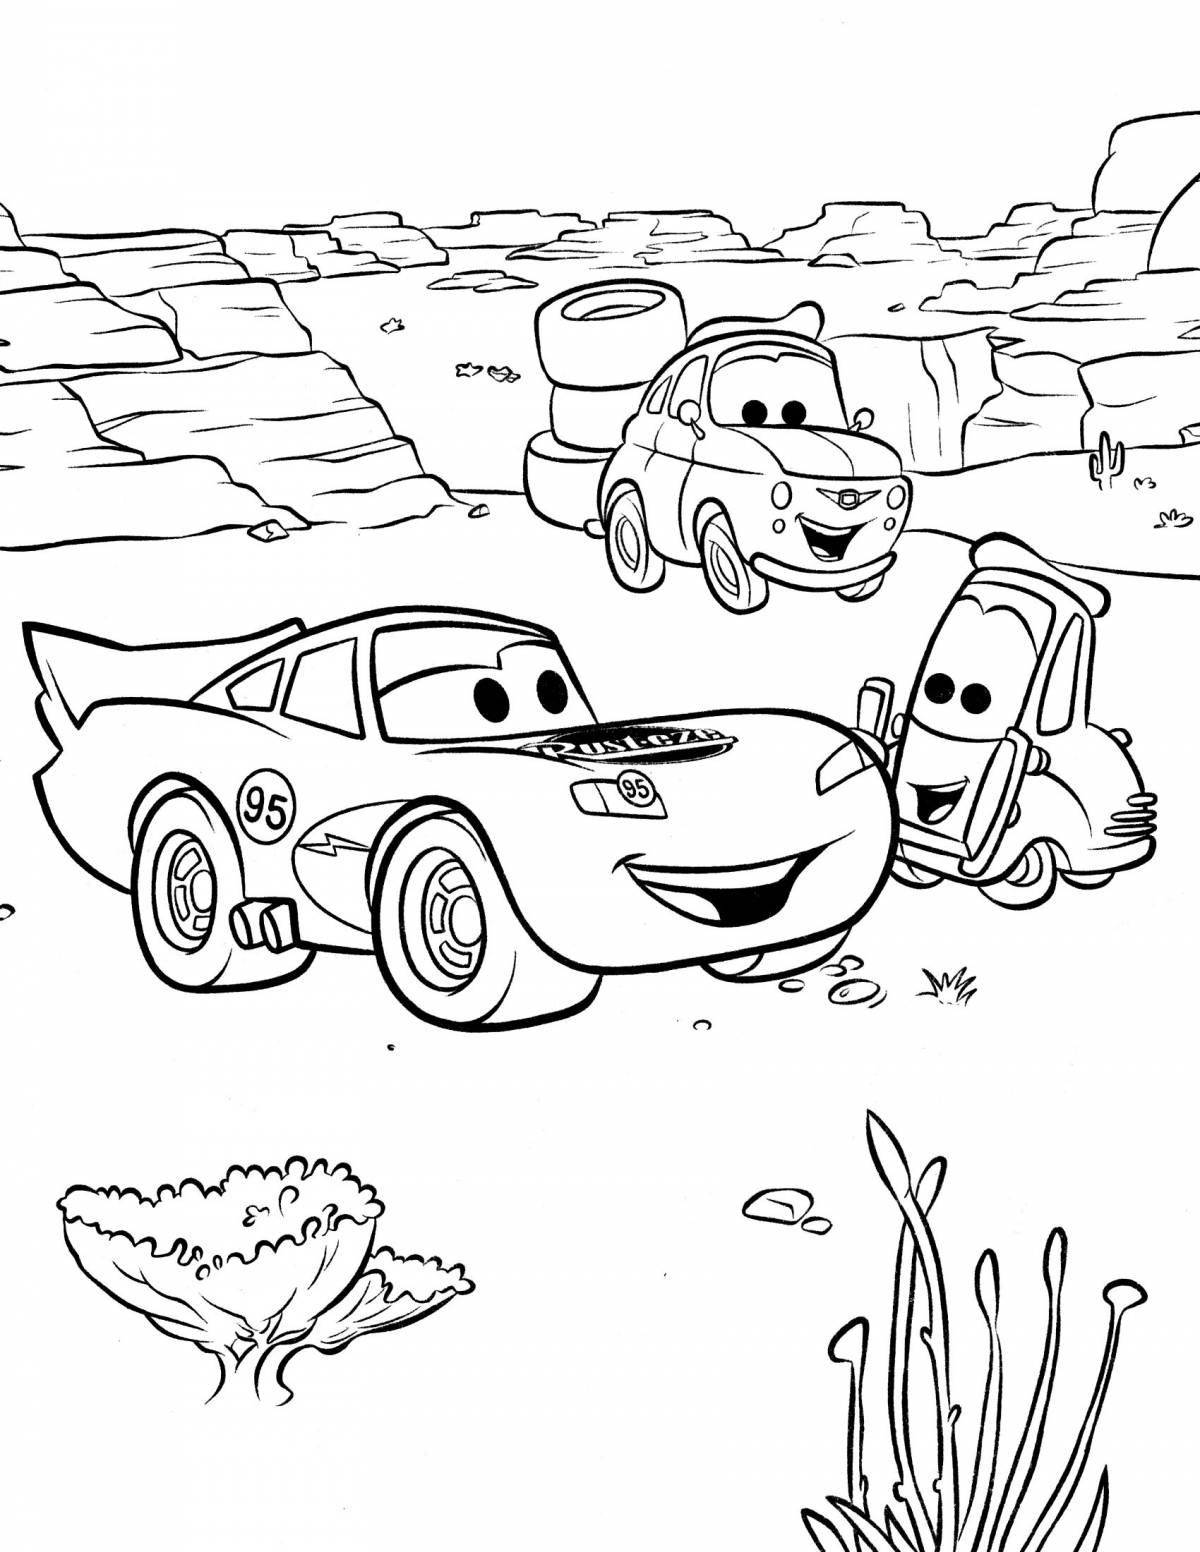 Fabulous cars coloring book for children 6-7 years old